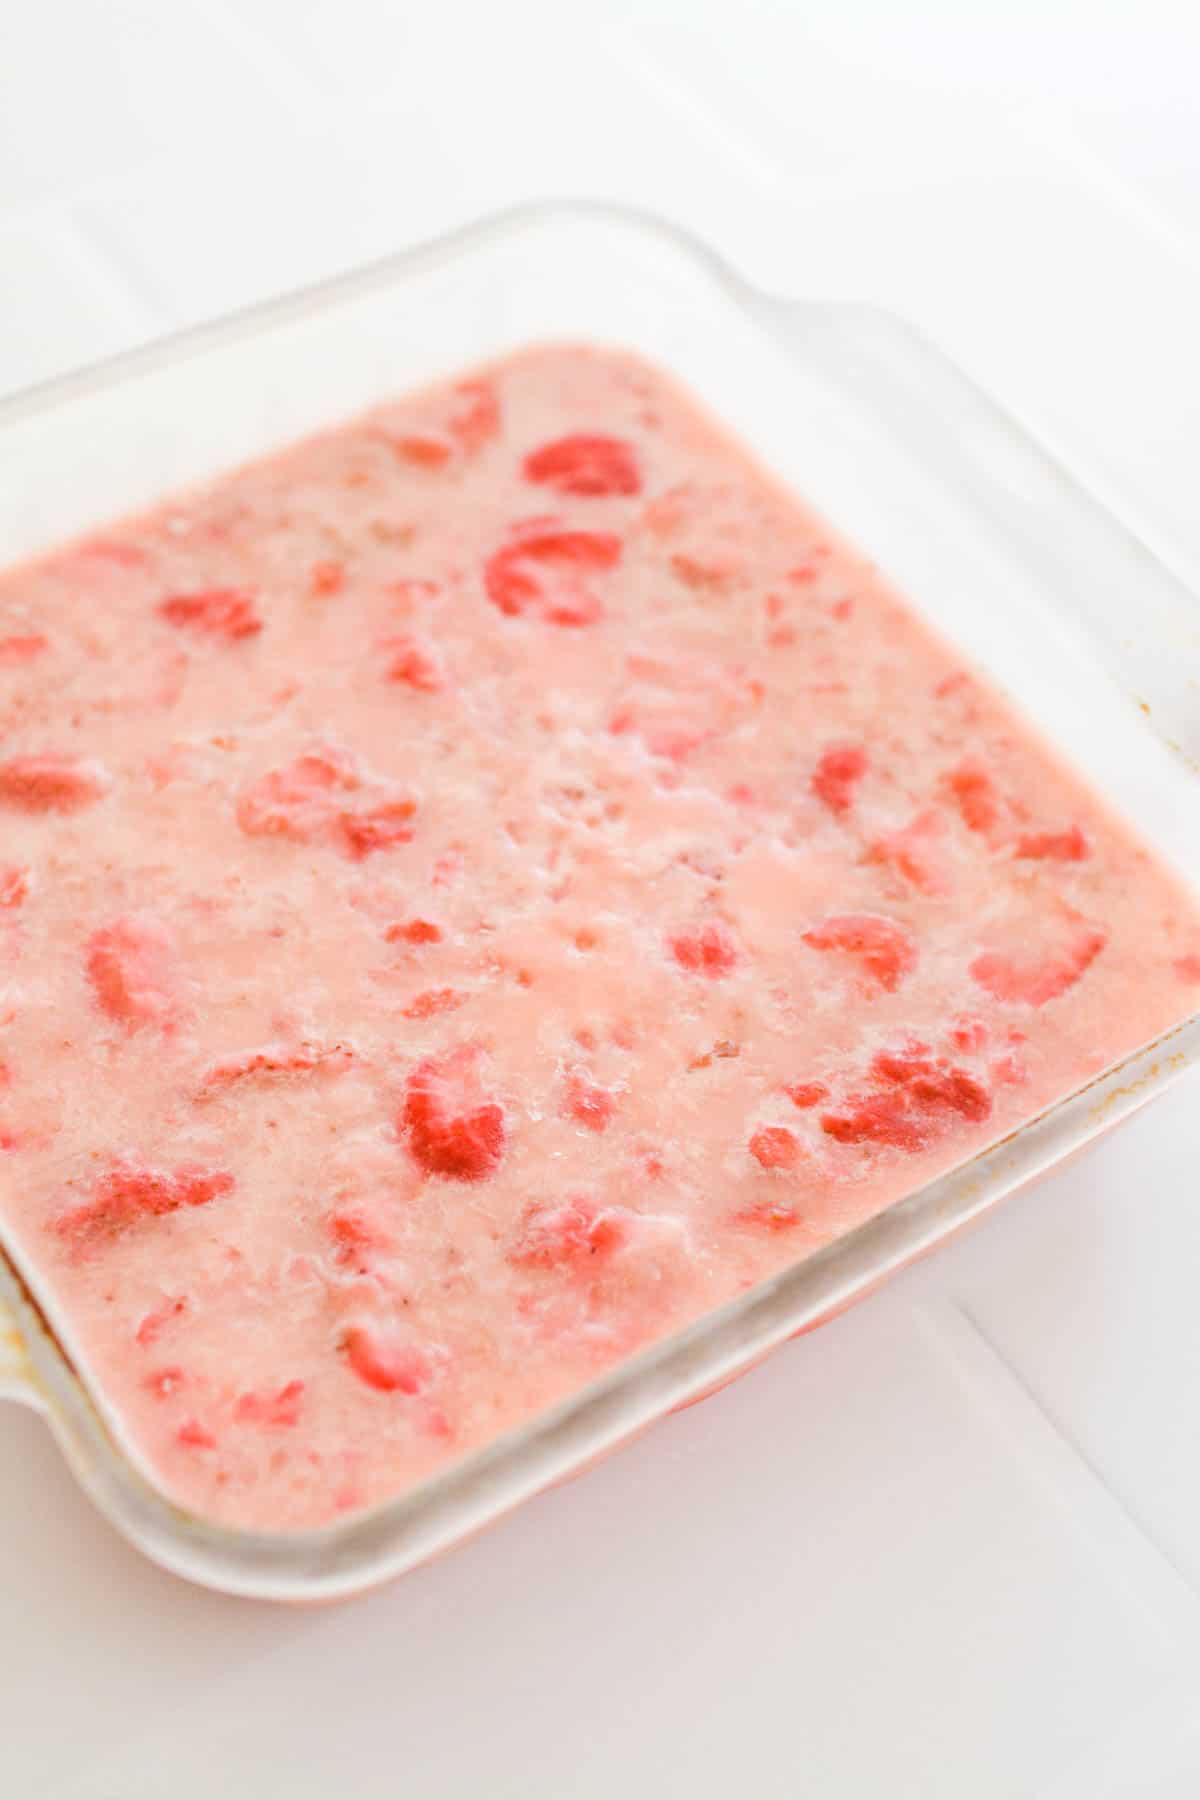 A square glass pan with a frozen strawberry dessert.